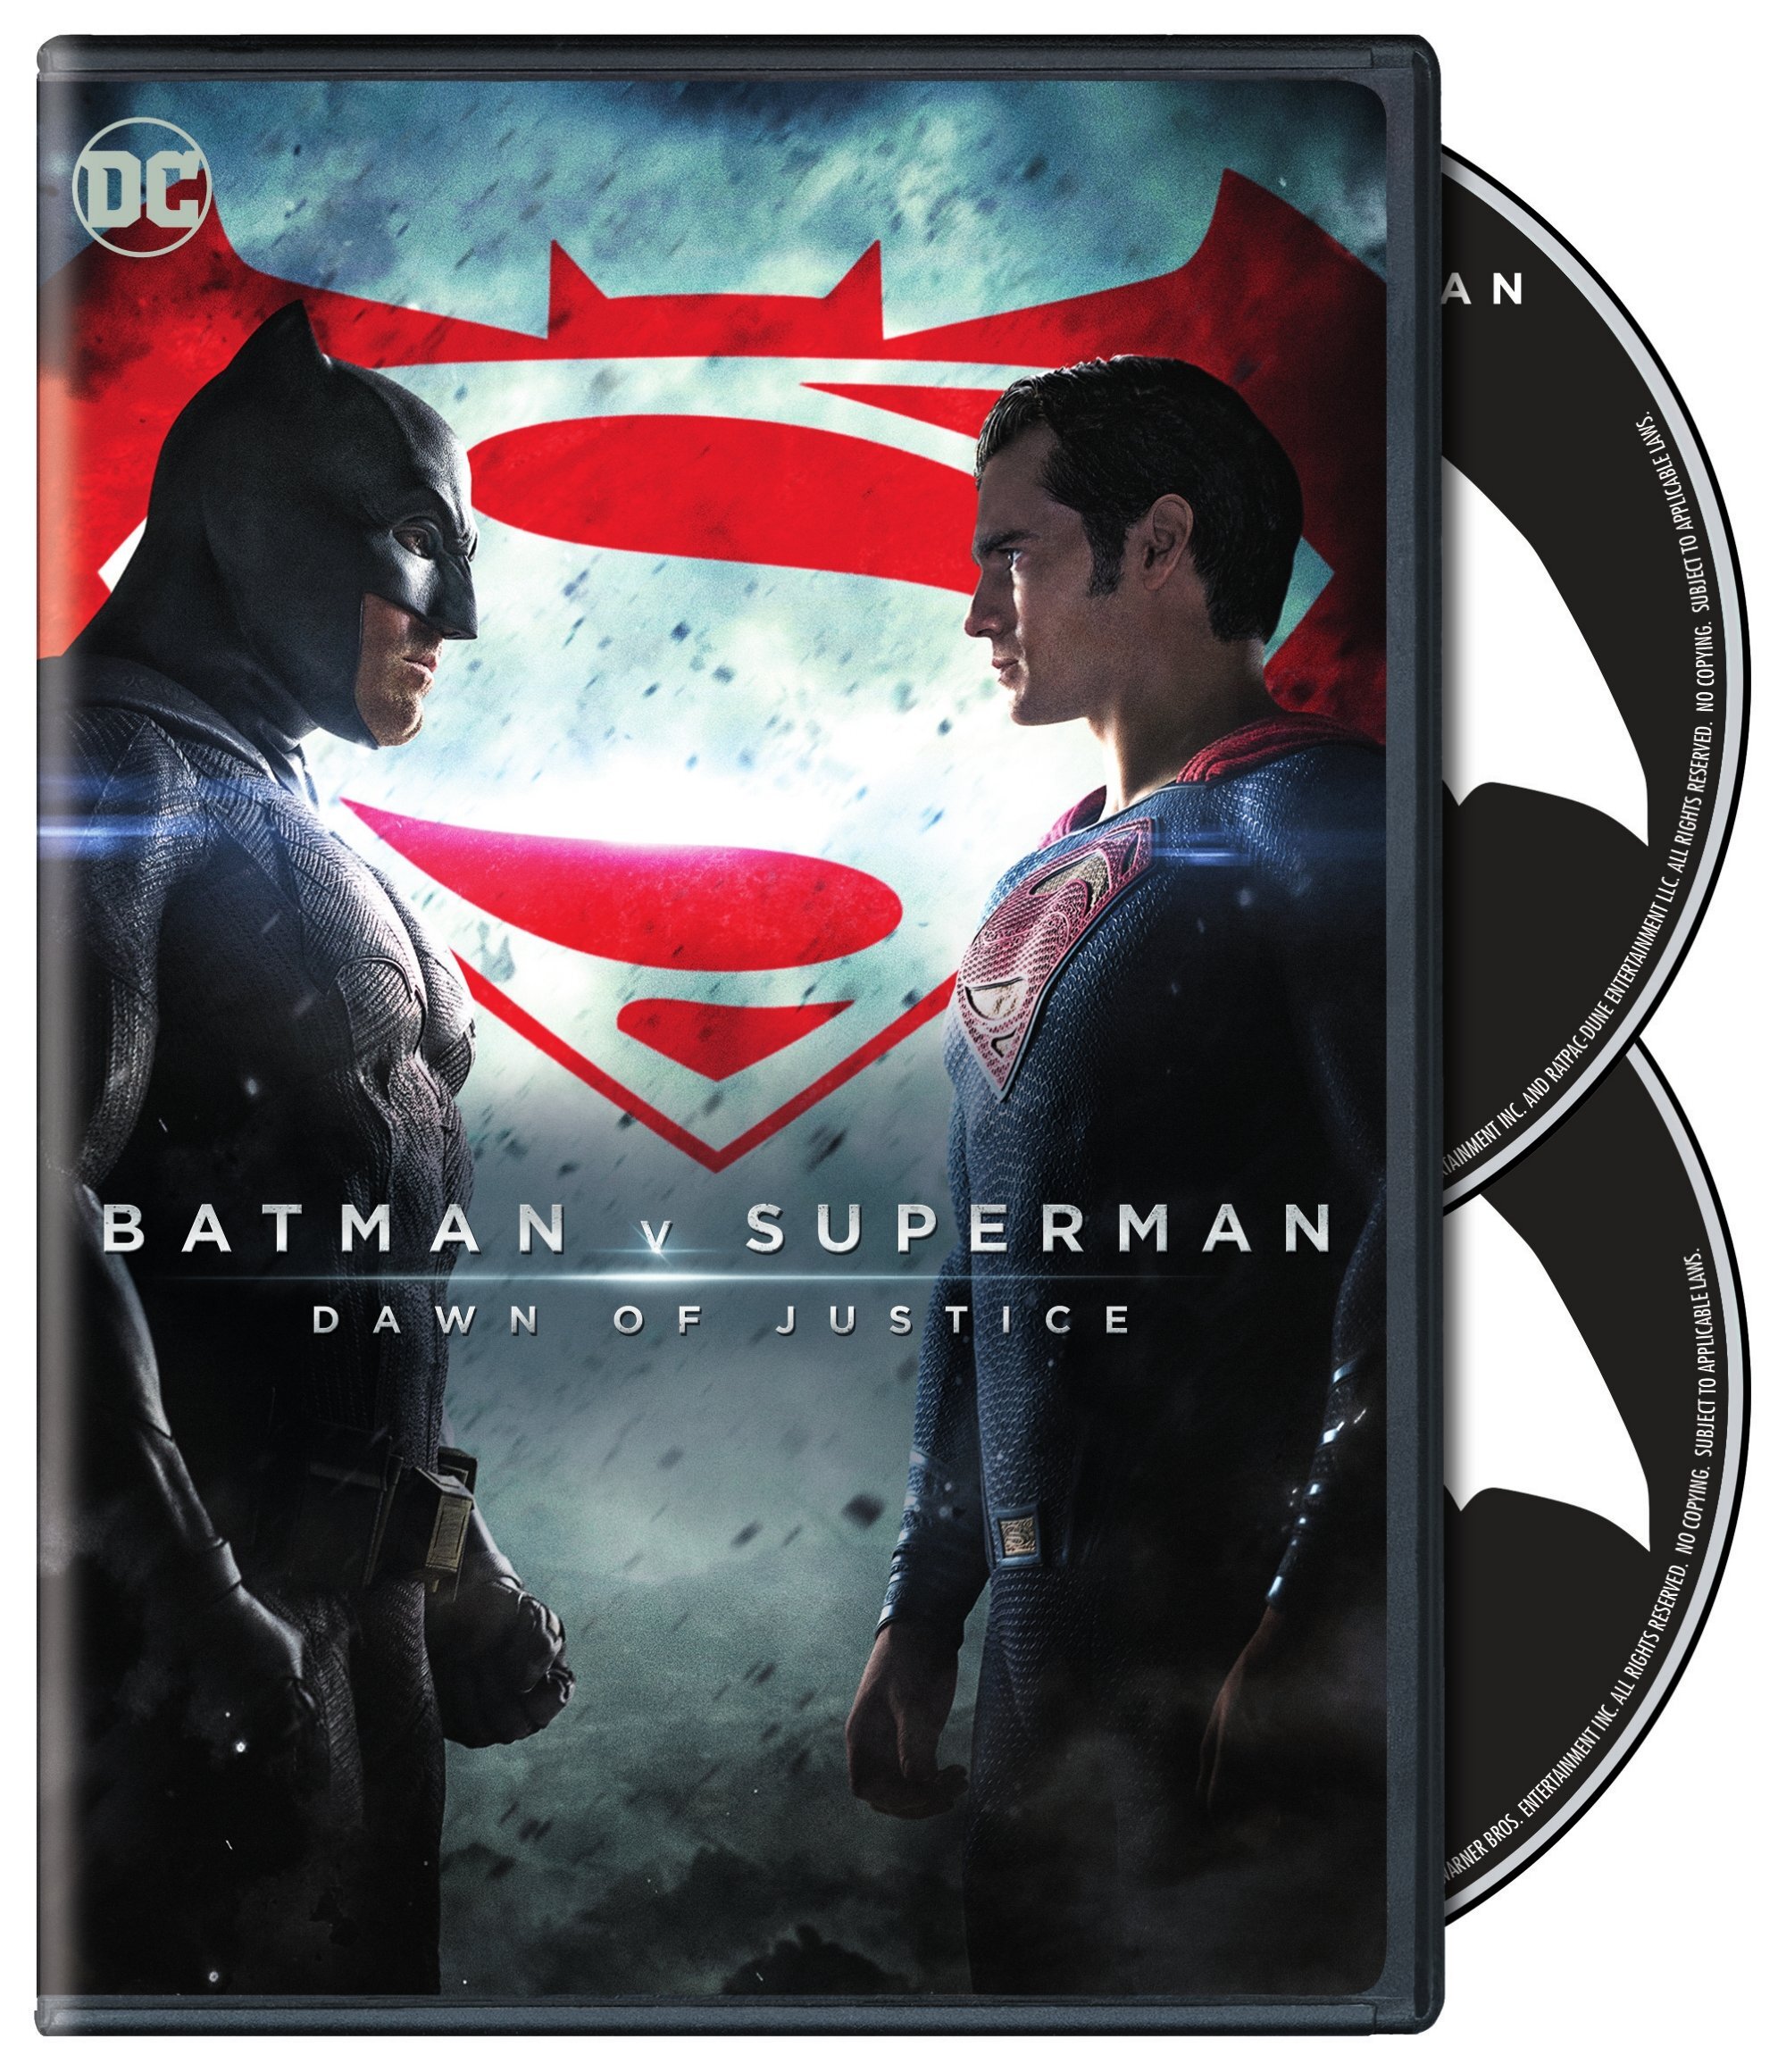 Batman V Superman - Dawn Of Justice (Special Edition) - DVD [ 2016 ]  - Action Movies On DVD - Movies On GRUV